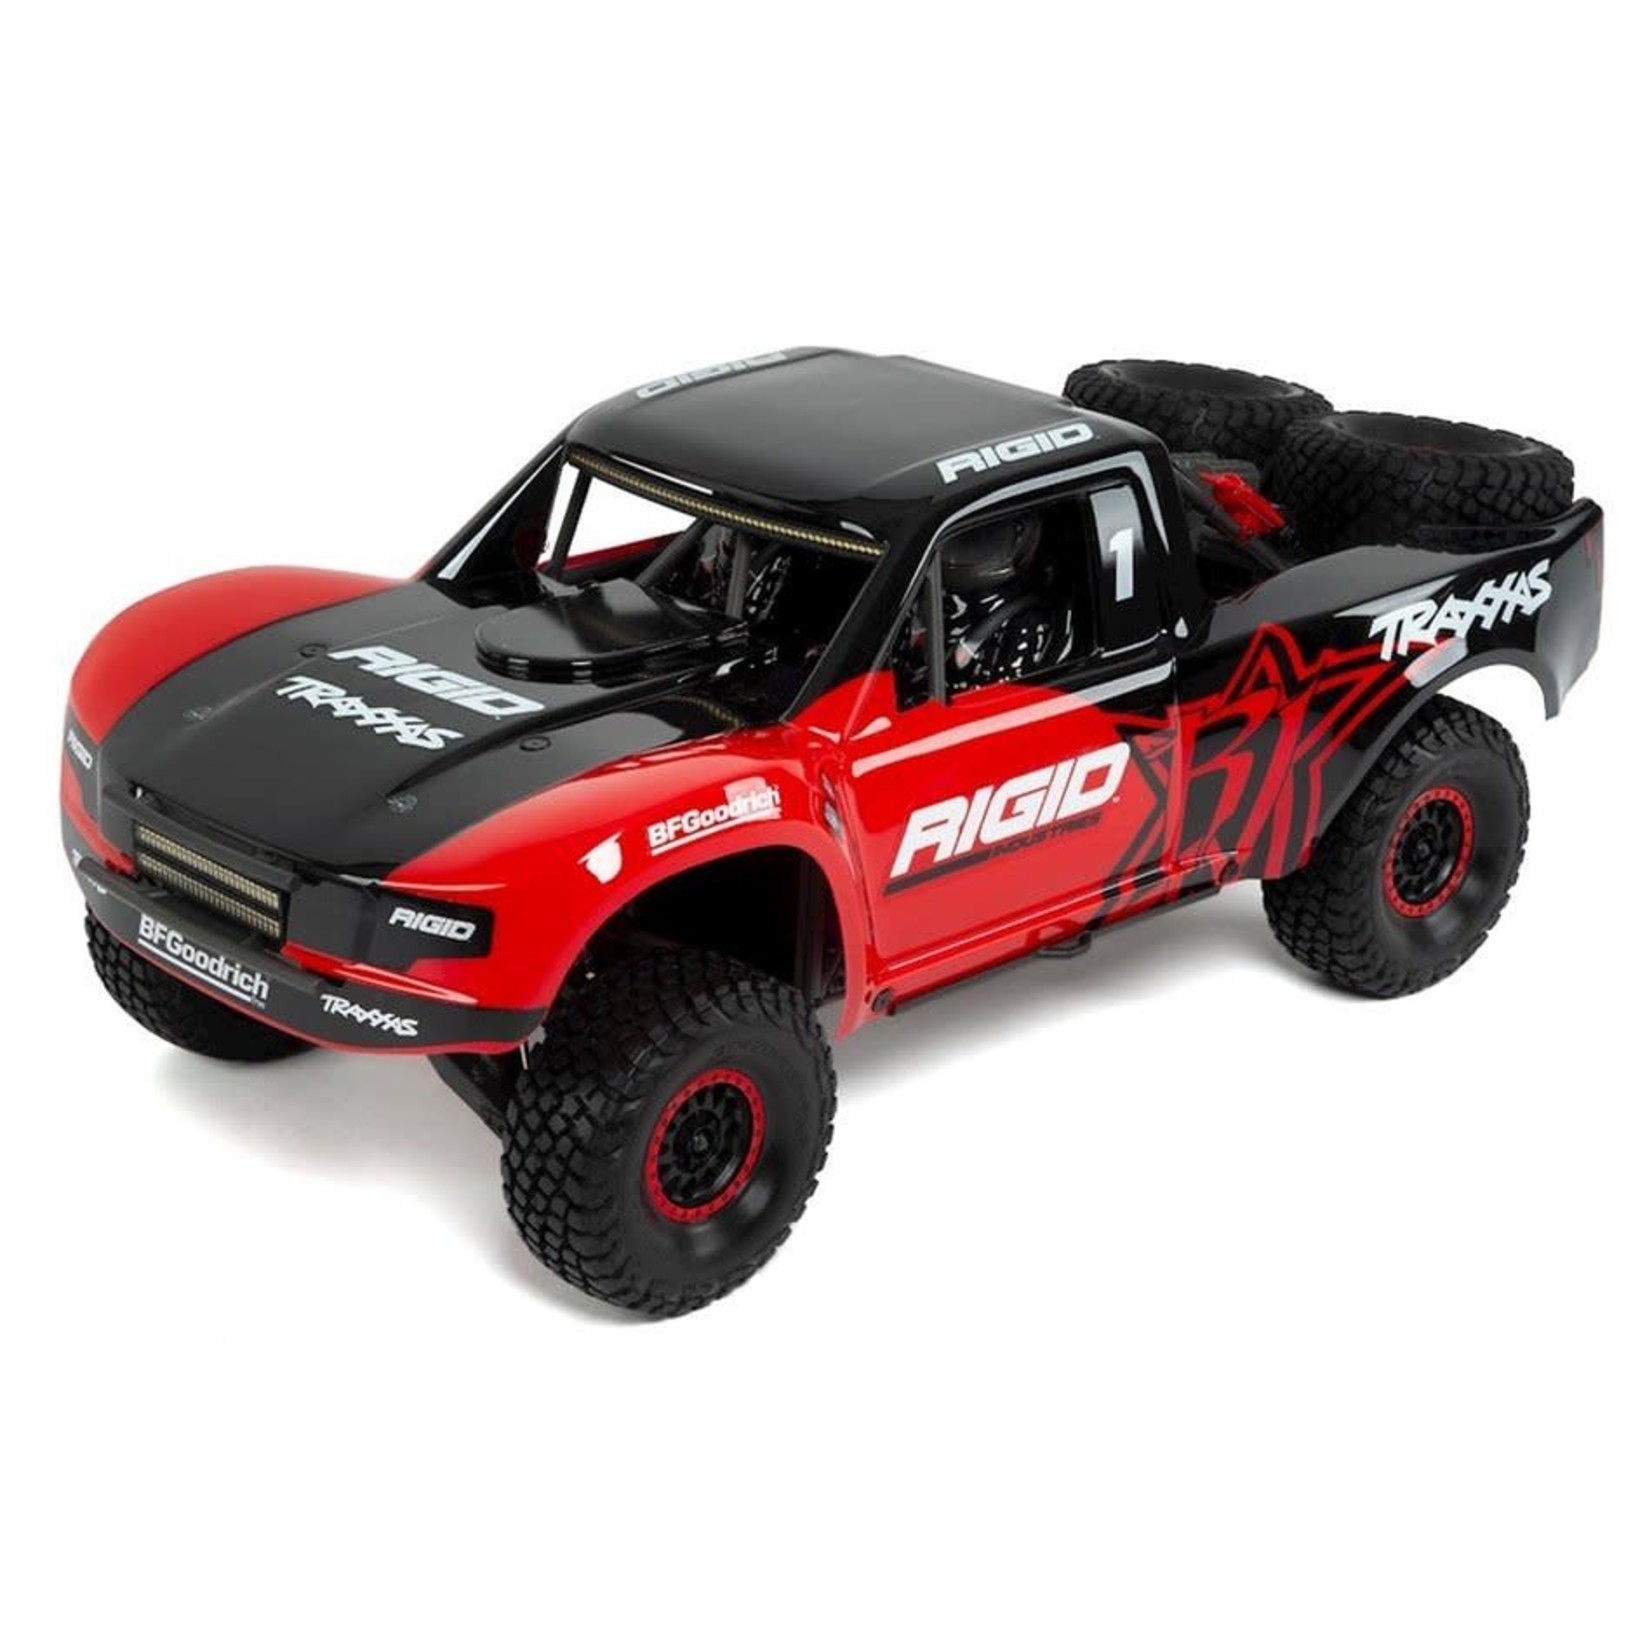 Traxxas Traxxas Unlimited Desert Racer UDR 6S RTR 4WD Race Truck (Rigid Industries) w/LED Lights & TQi 2.4GHz Radio #85086-4-RGD